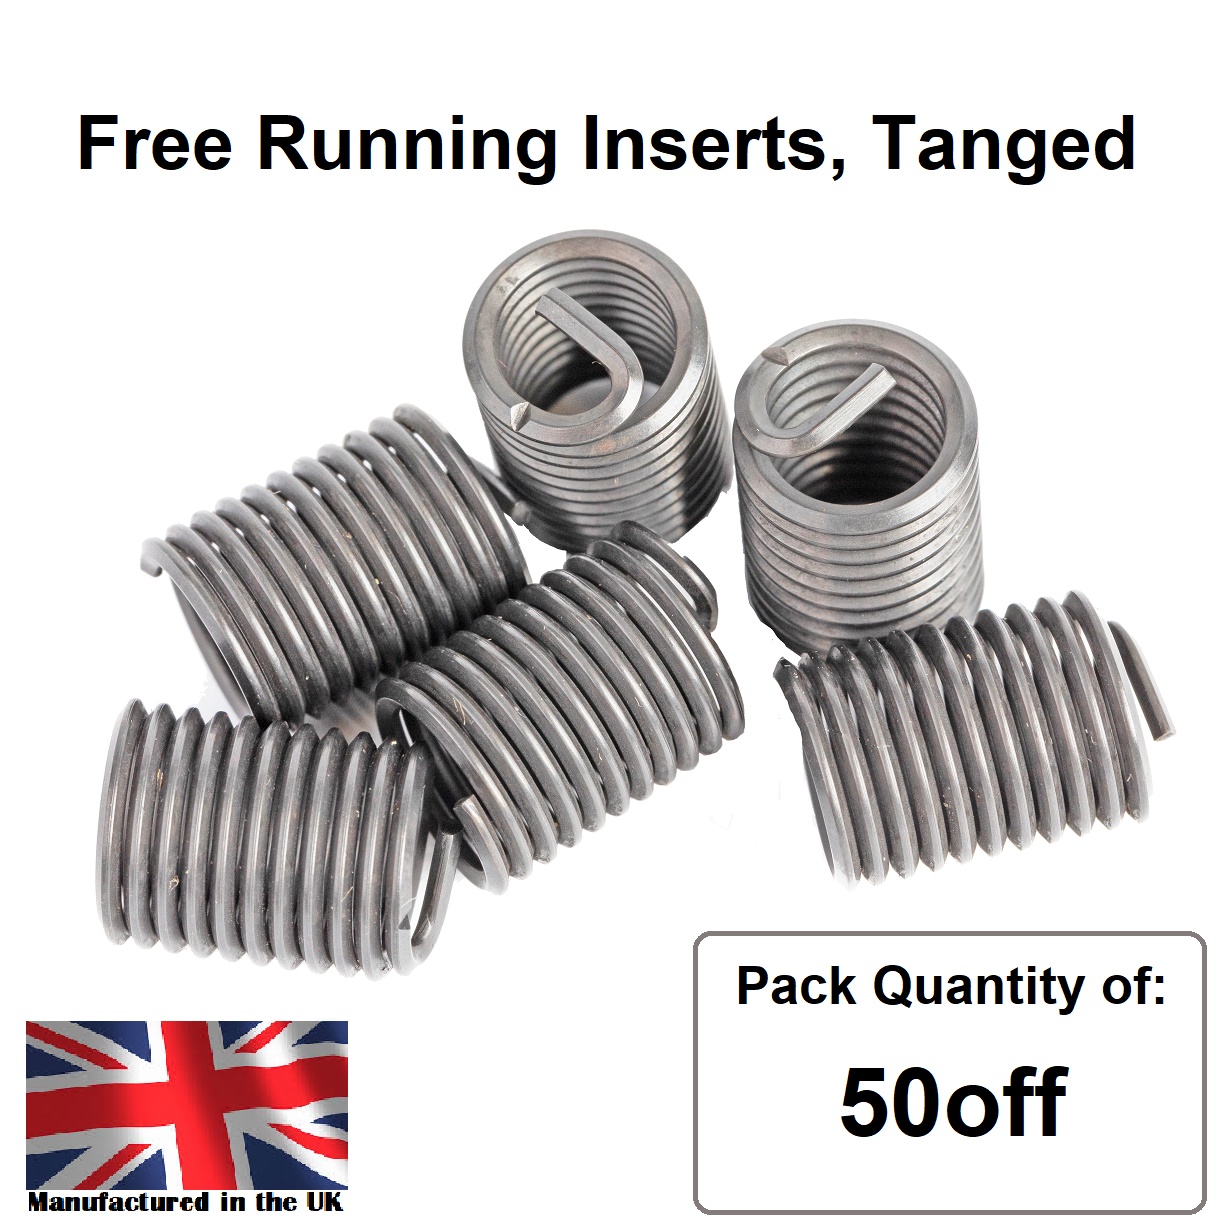 10-32 x 2D UNF, Free Running, Tanged, Wire Thread Repair Insert, 304/A2 Stainless (Pack 50)